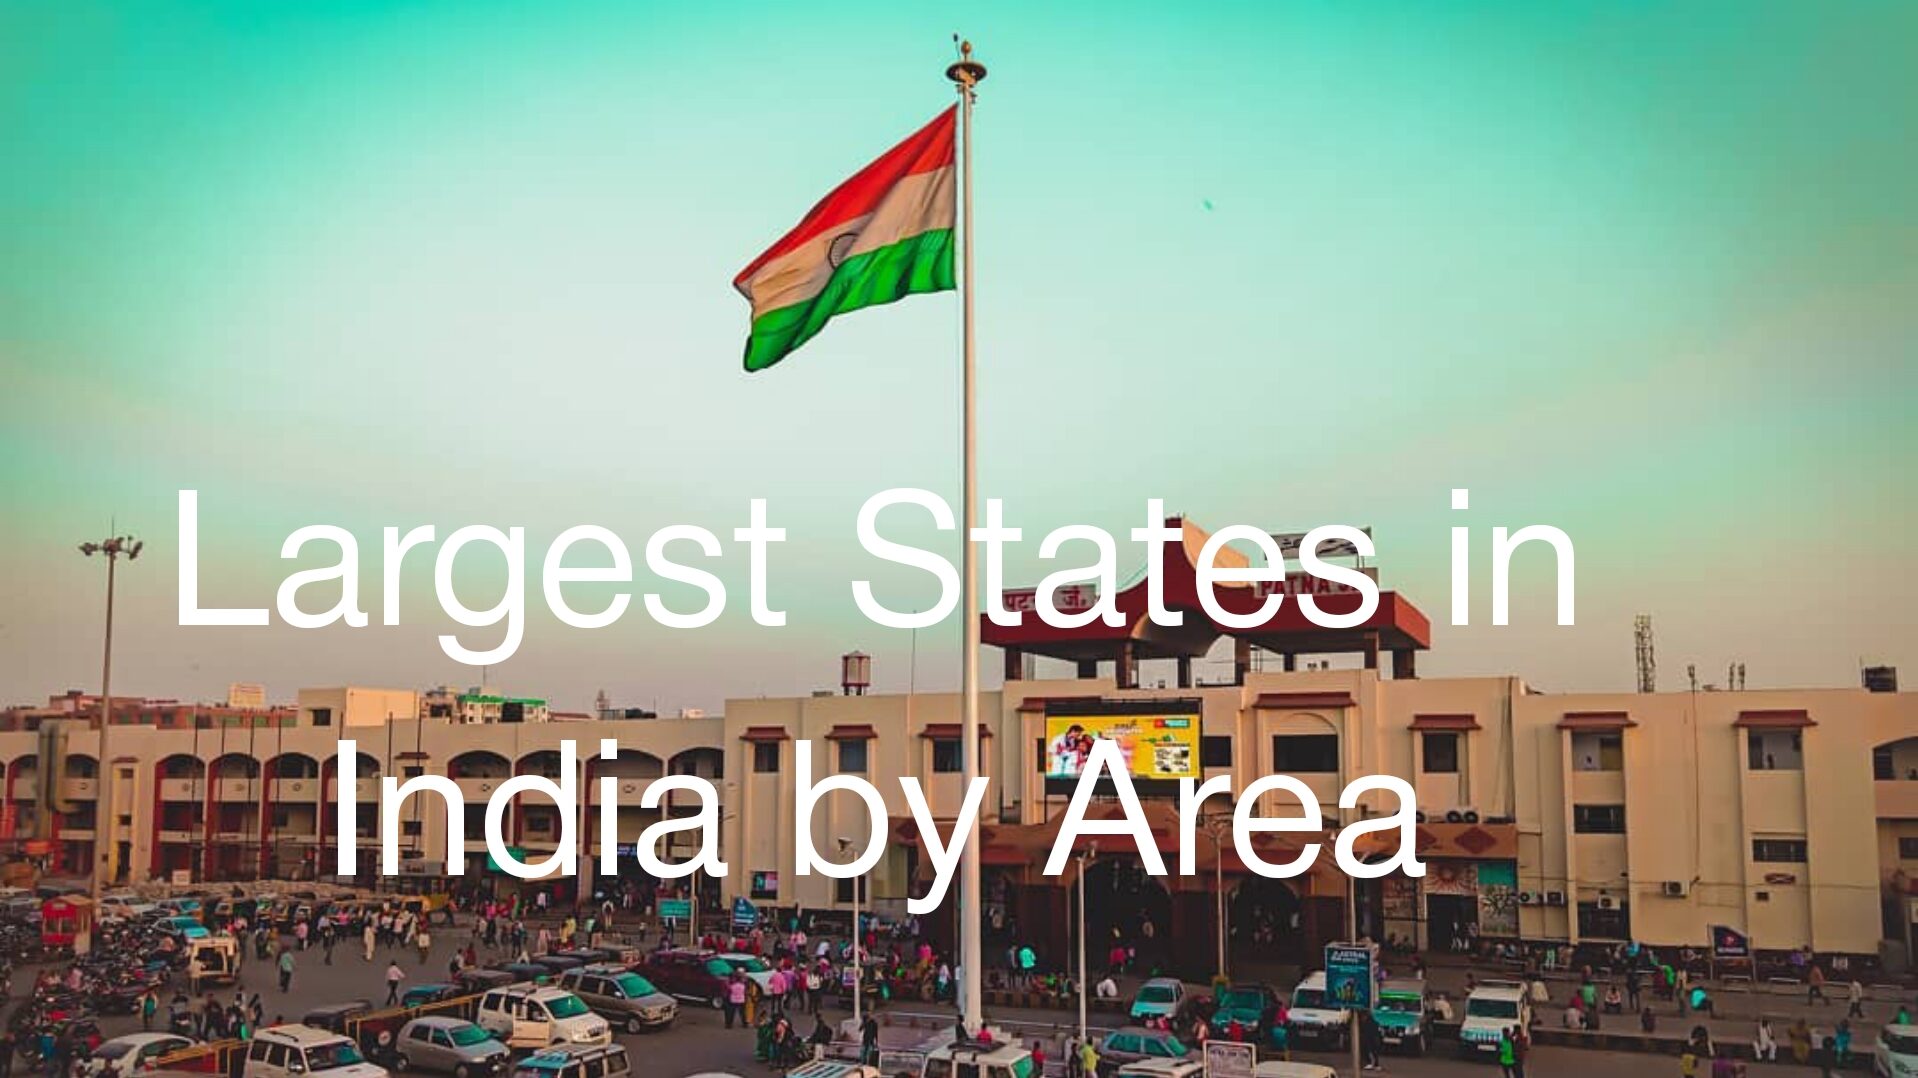 Largest States in India by Area